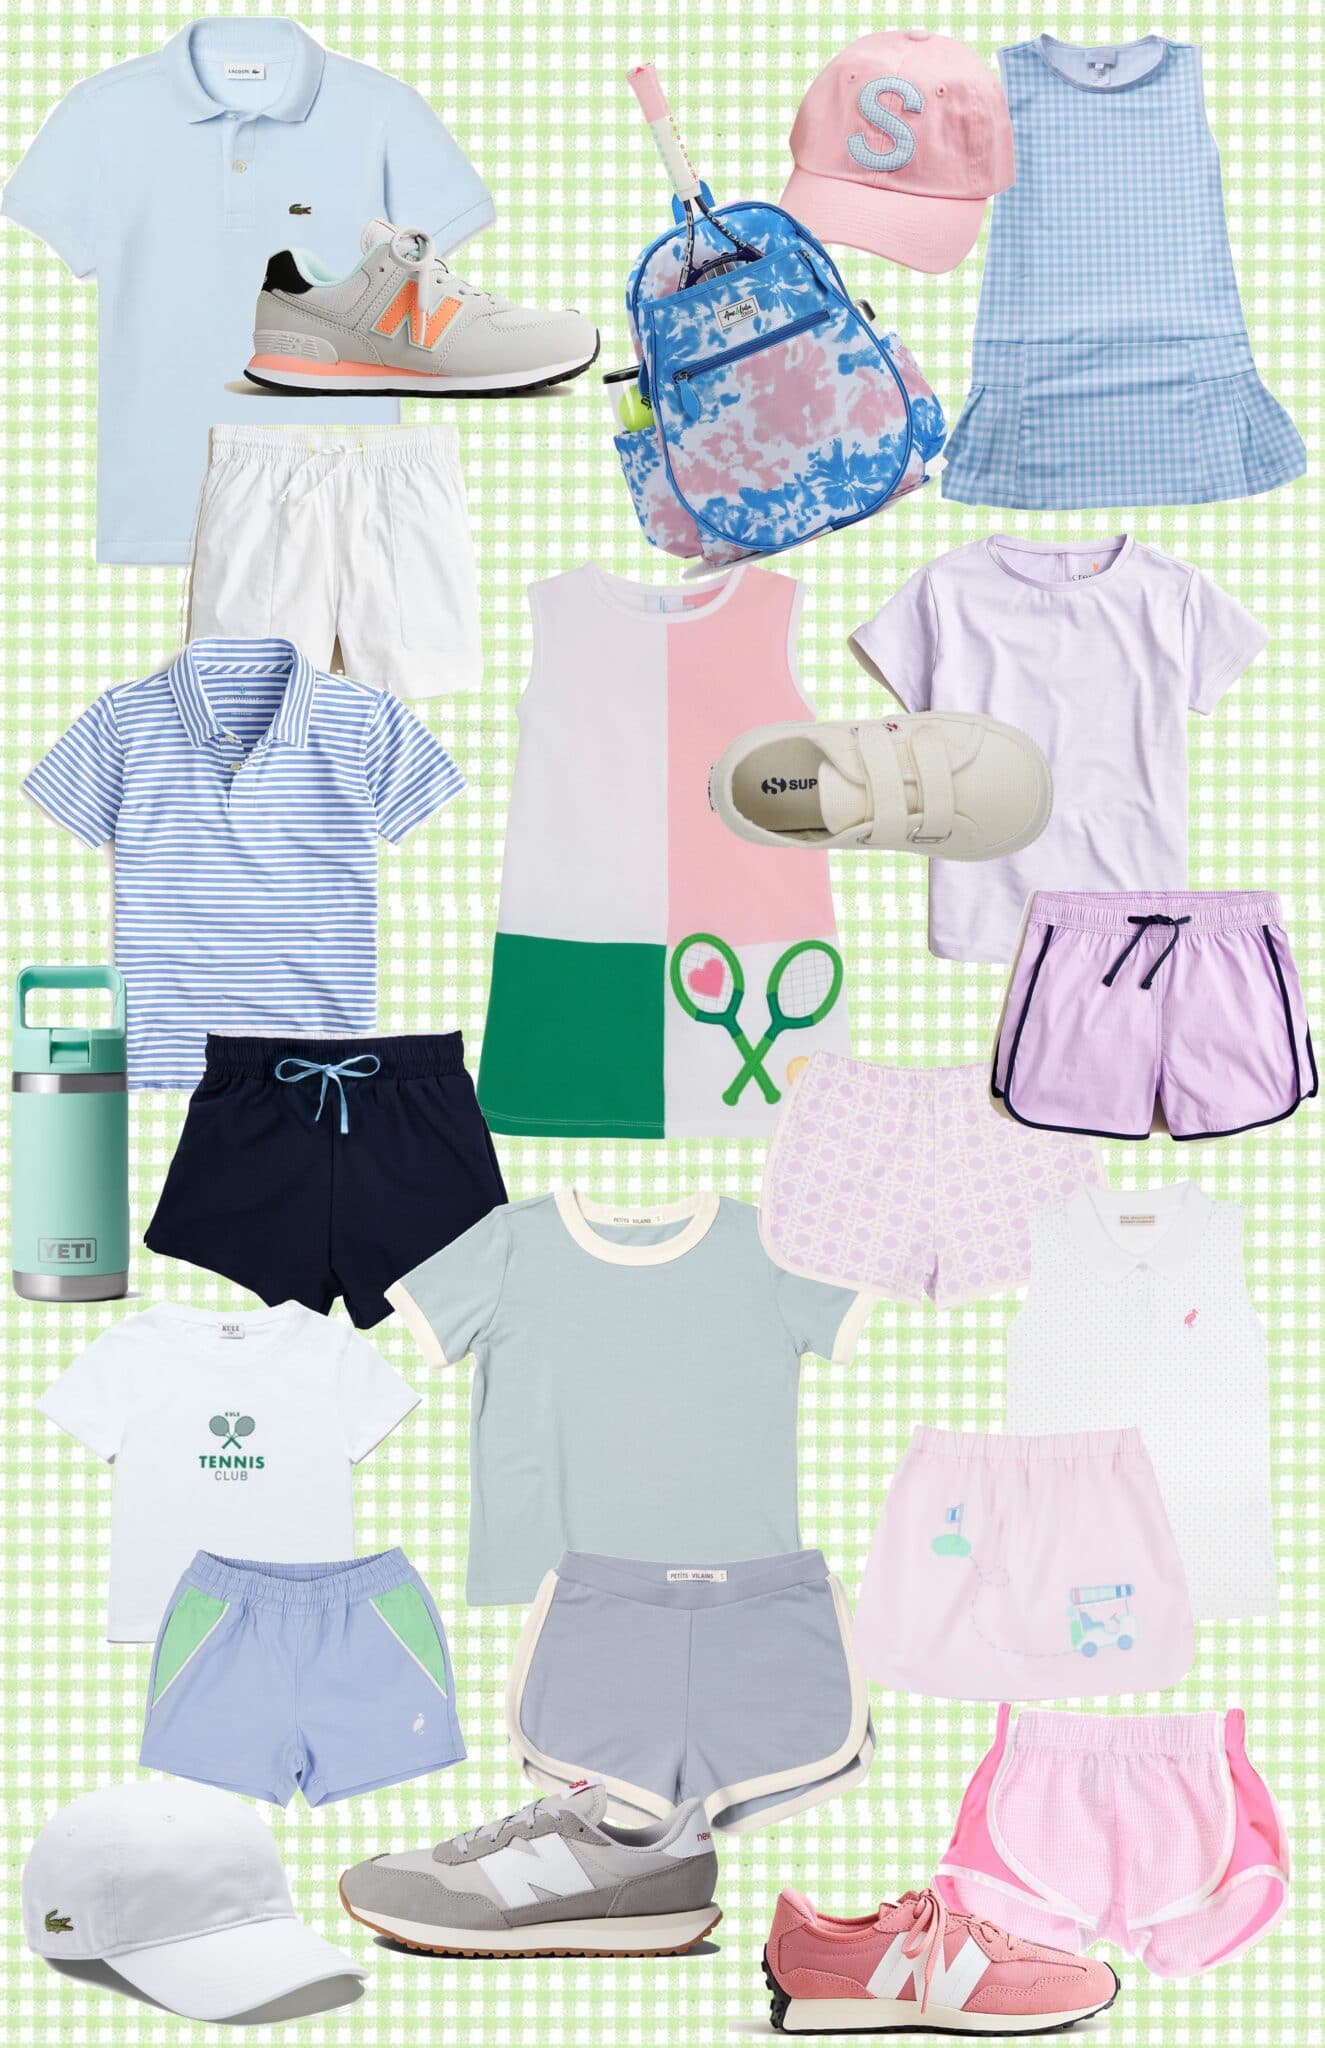 Children's Athletic + Camp Outfits.